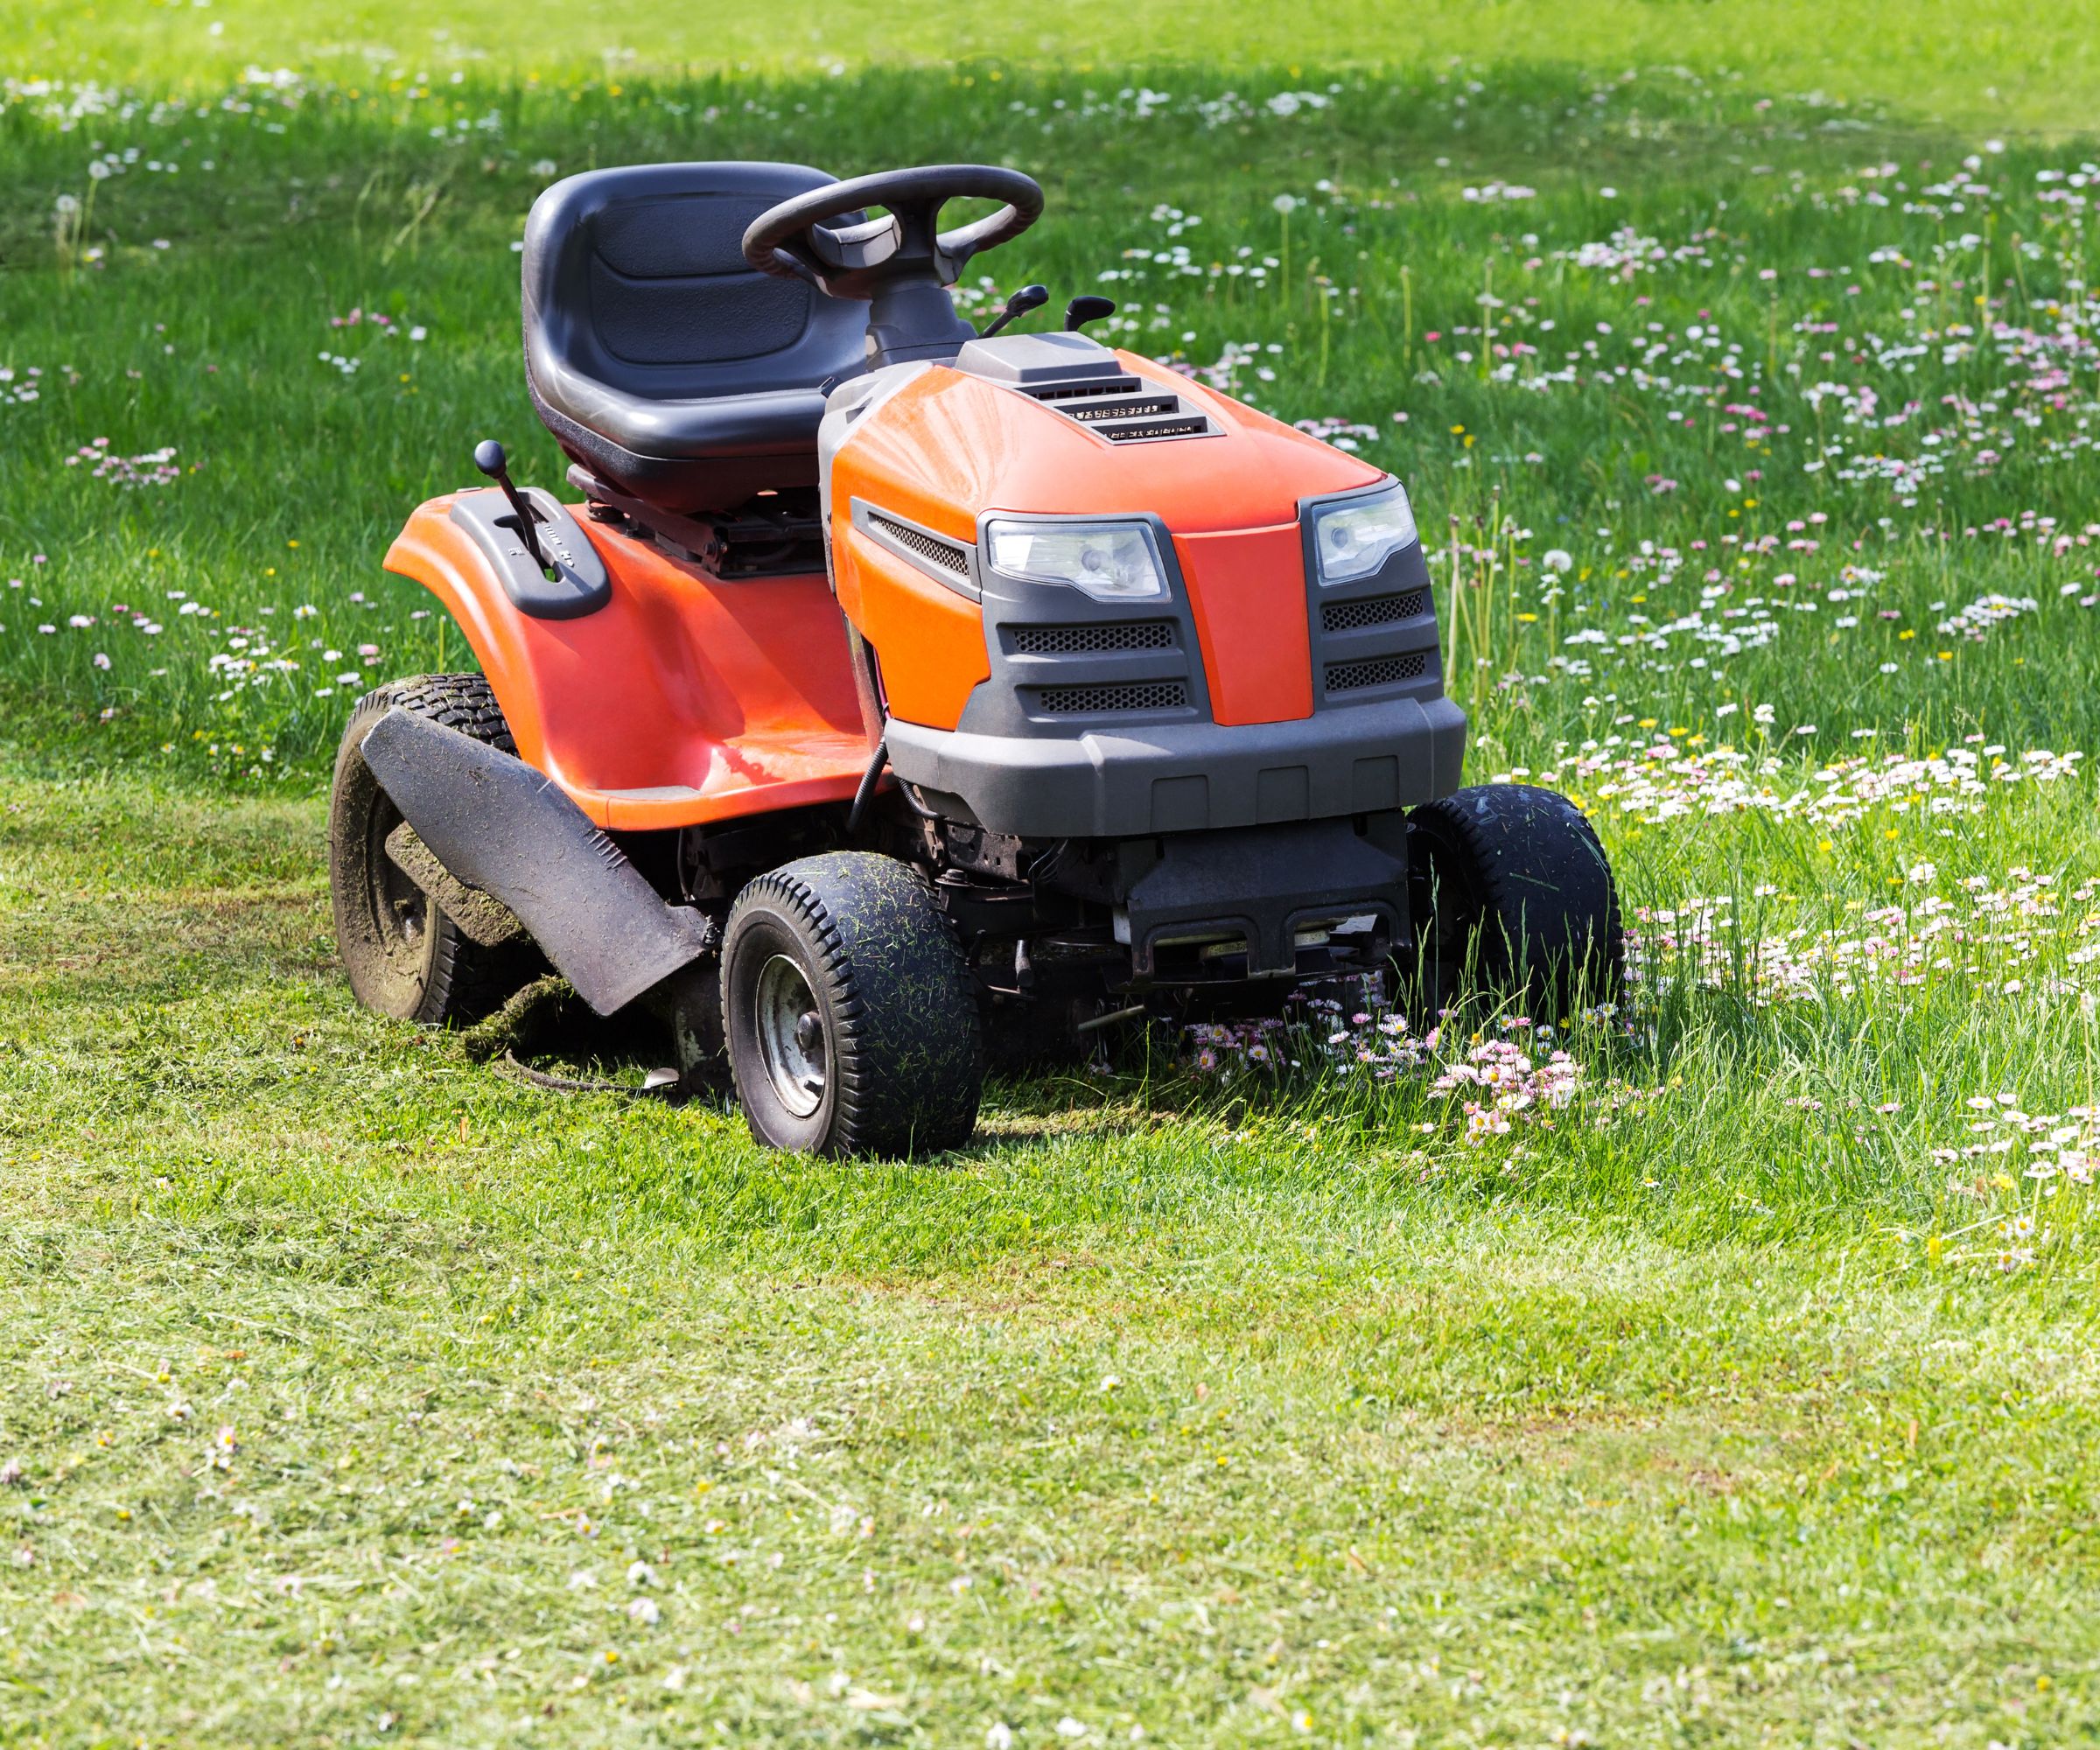 A riding mower cutting flowers and high grass